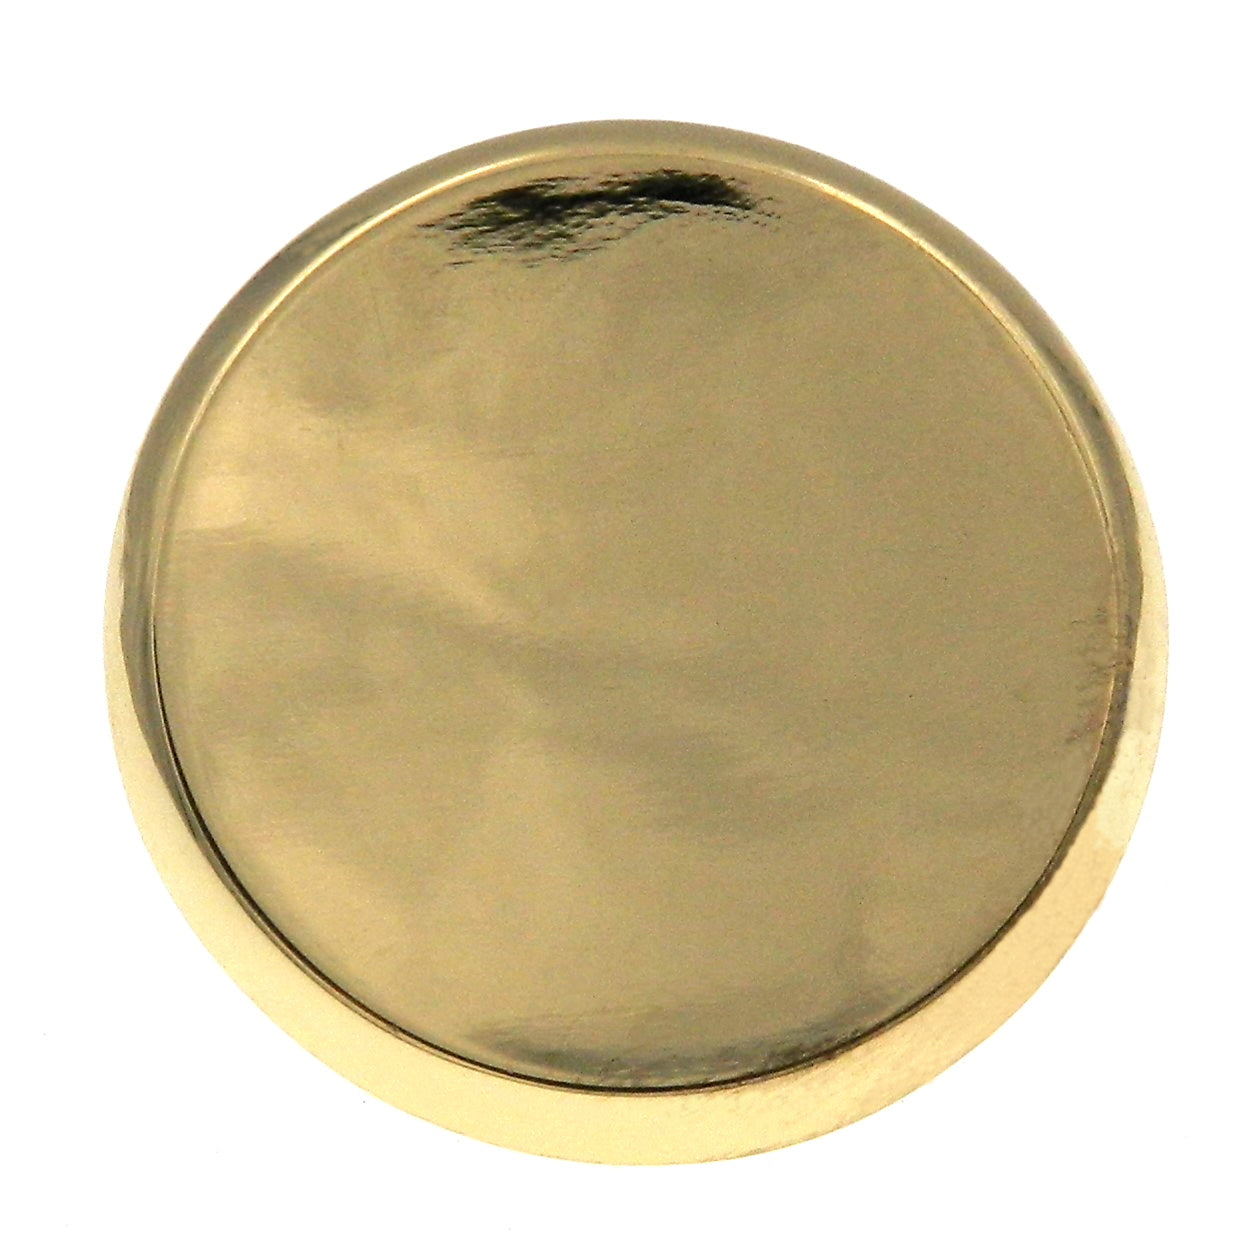 5 Pack of Ultra Designer's Edge Polished Brass Round 1 3/8" Knobs 98551